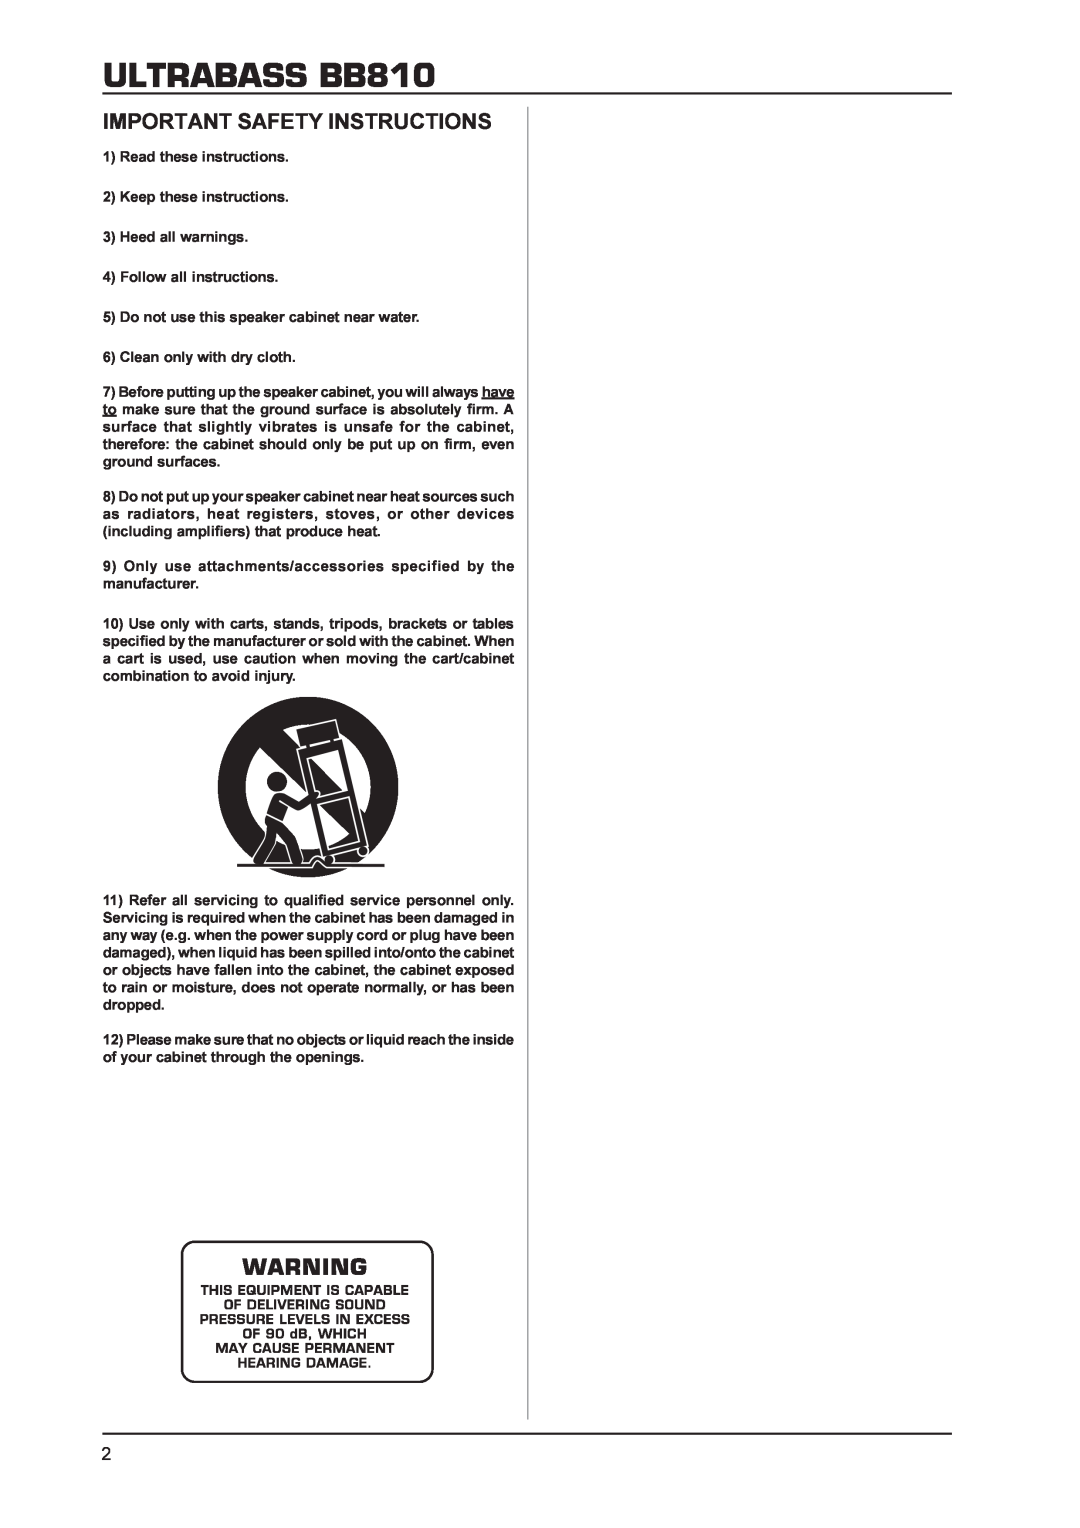 Behringer manual ULTRABASS BB810, Important Safety Instructions 